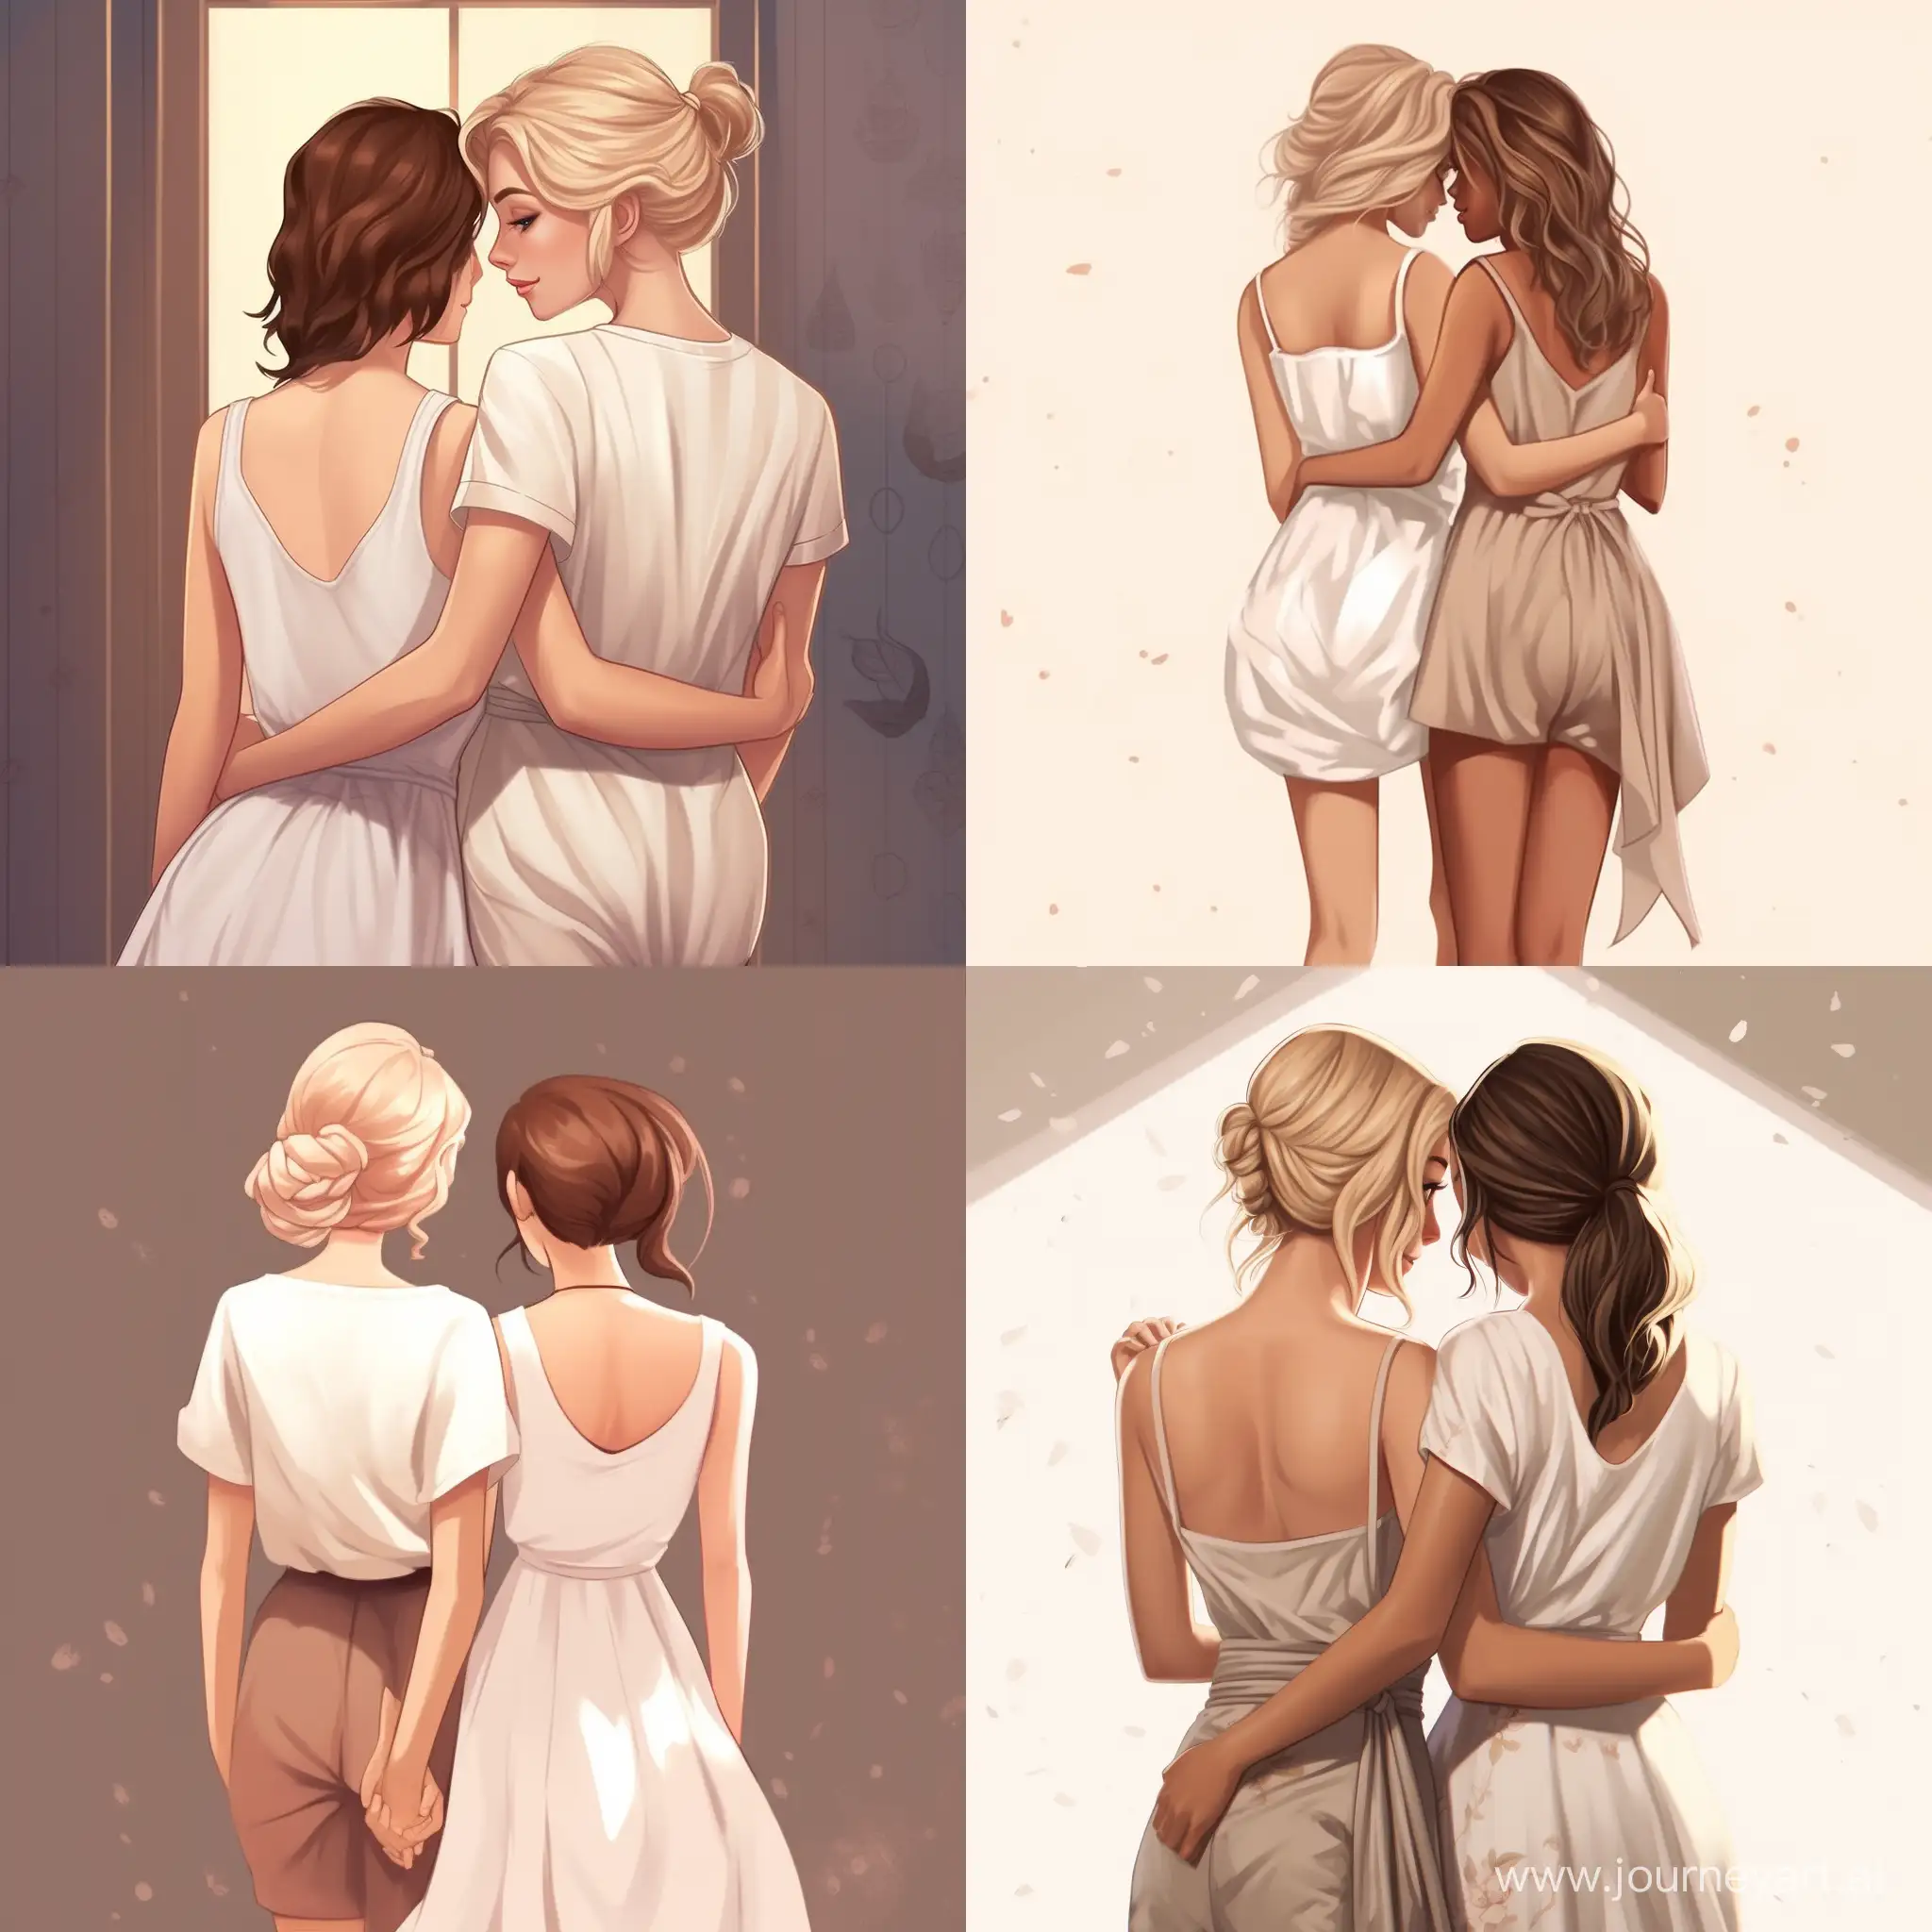  woman, short blond hair, short dress, white shoes, illustration, full body, disney style. Hugs her friend View from the back.